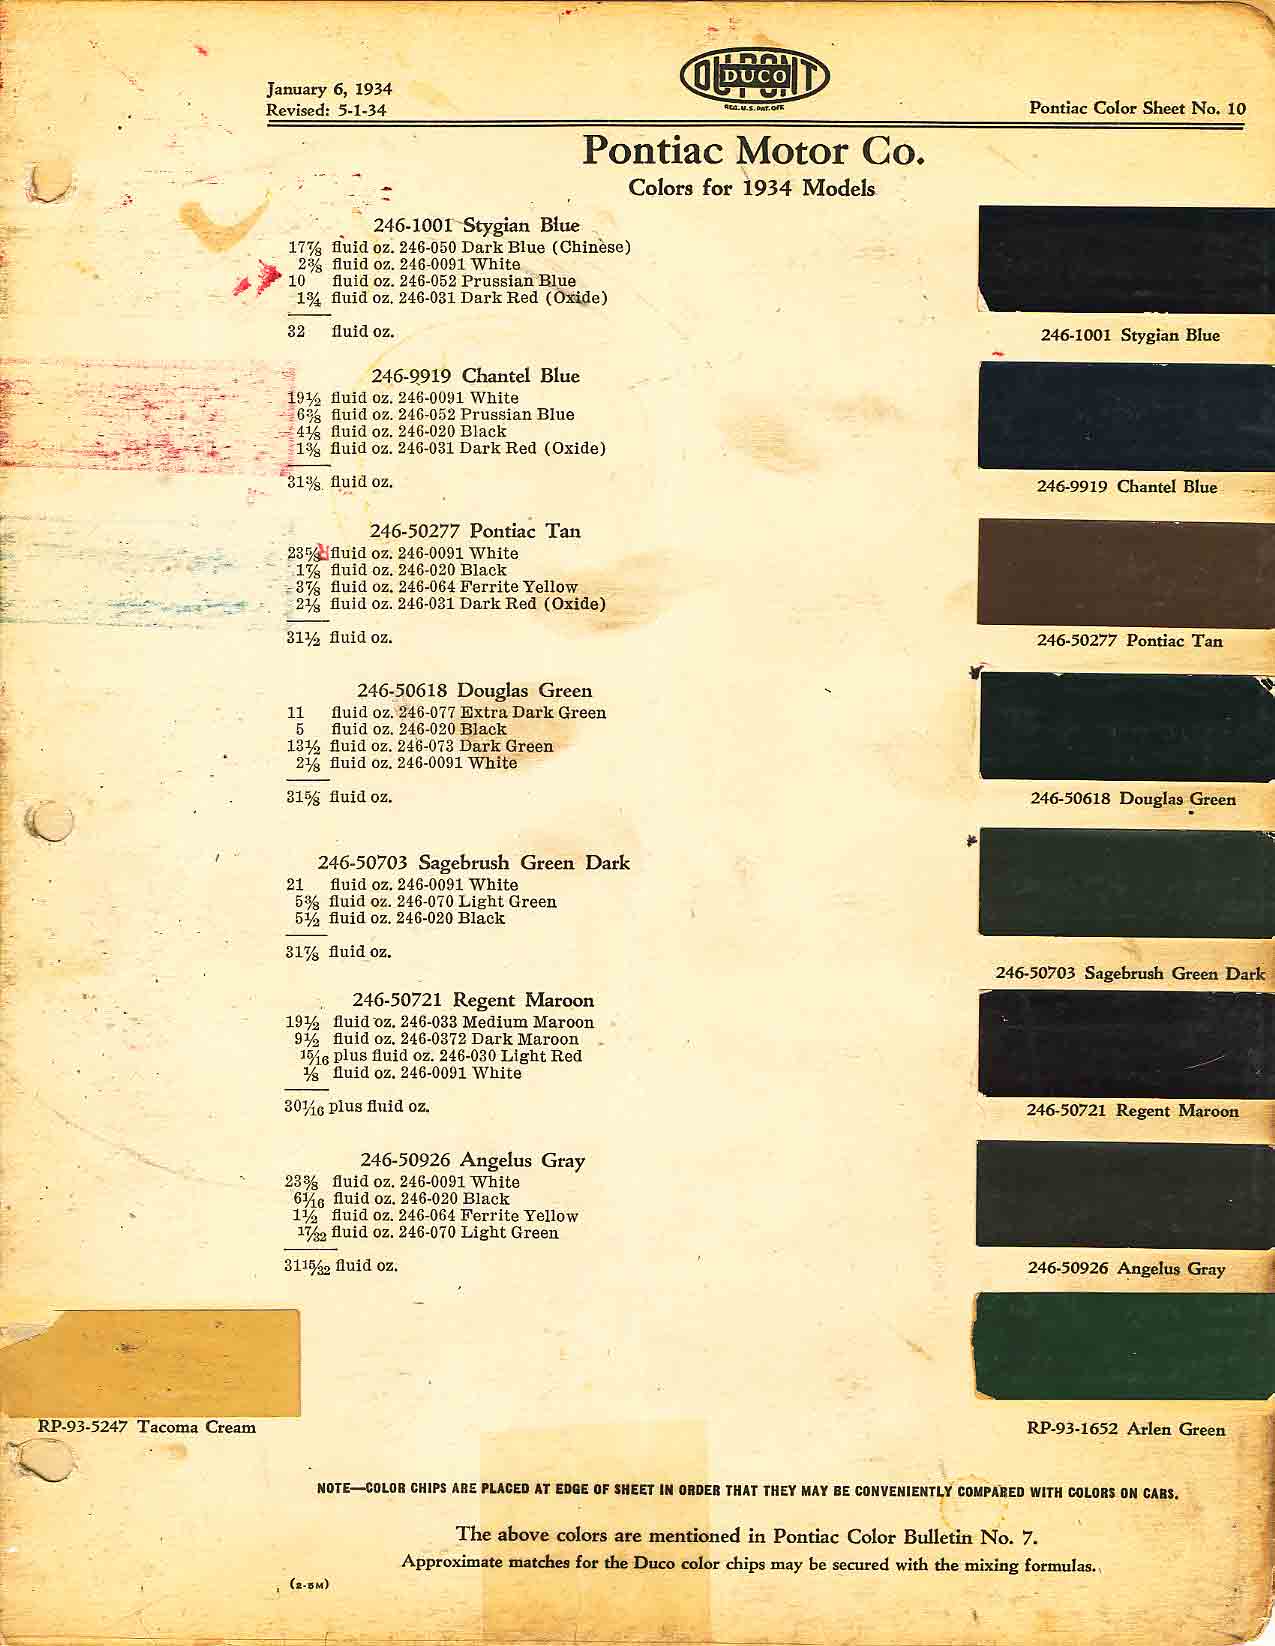 Colors and codes used on Pontiac Vehicles in 1934